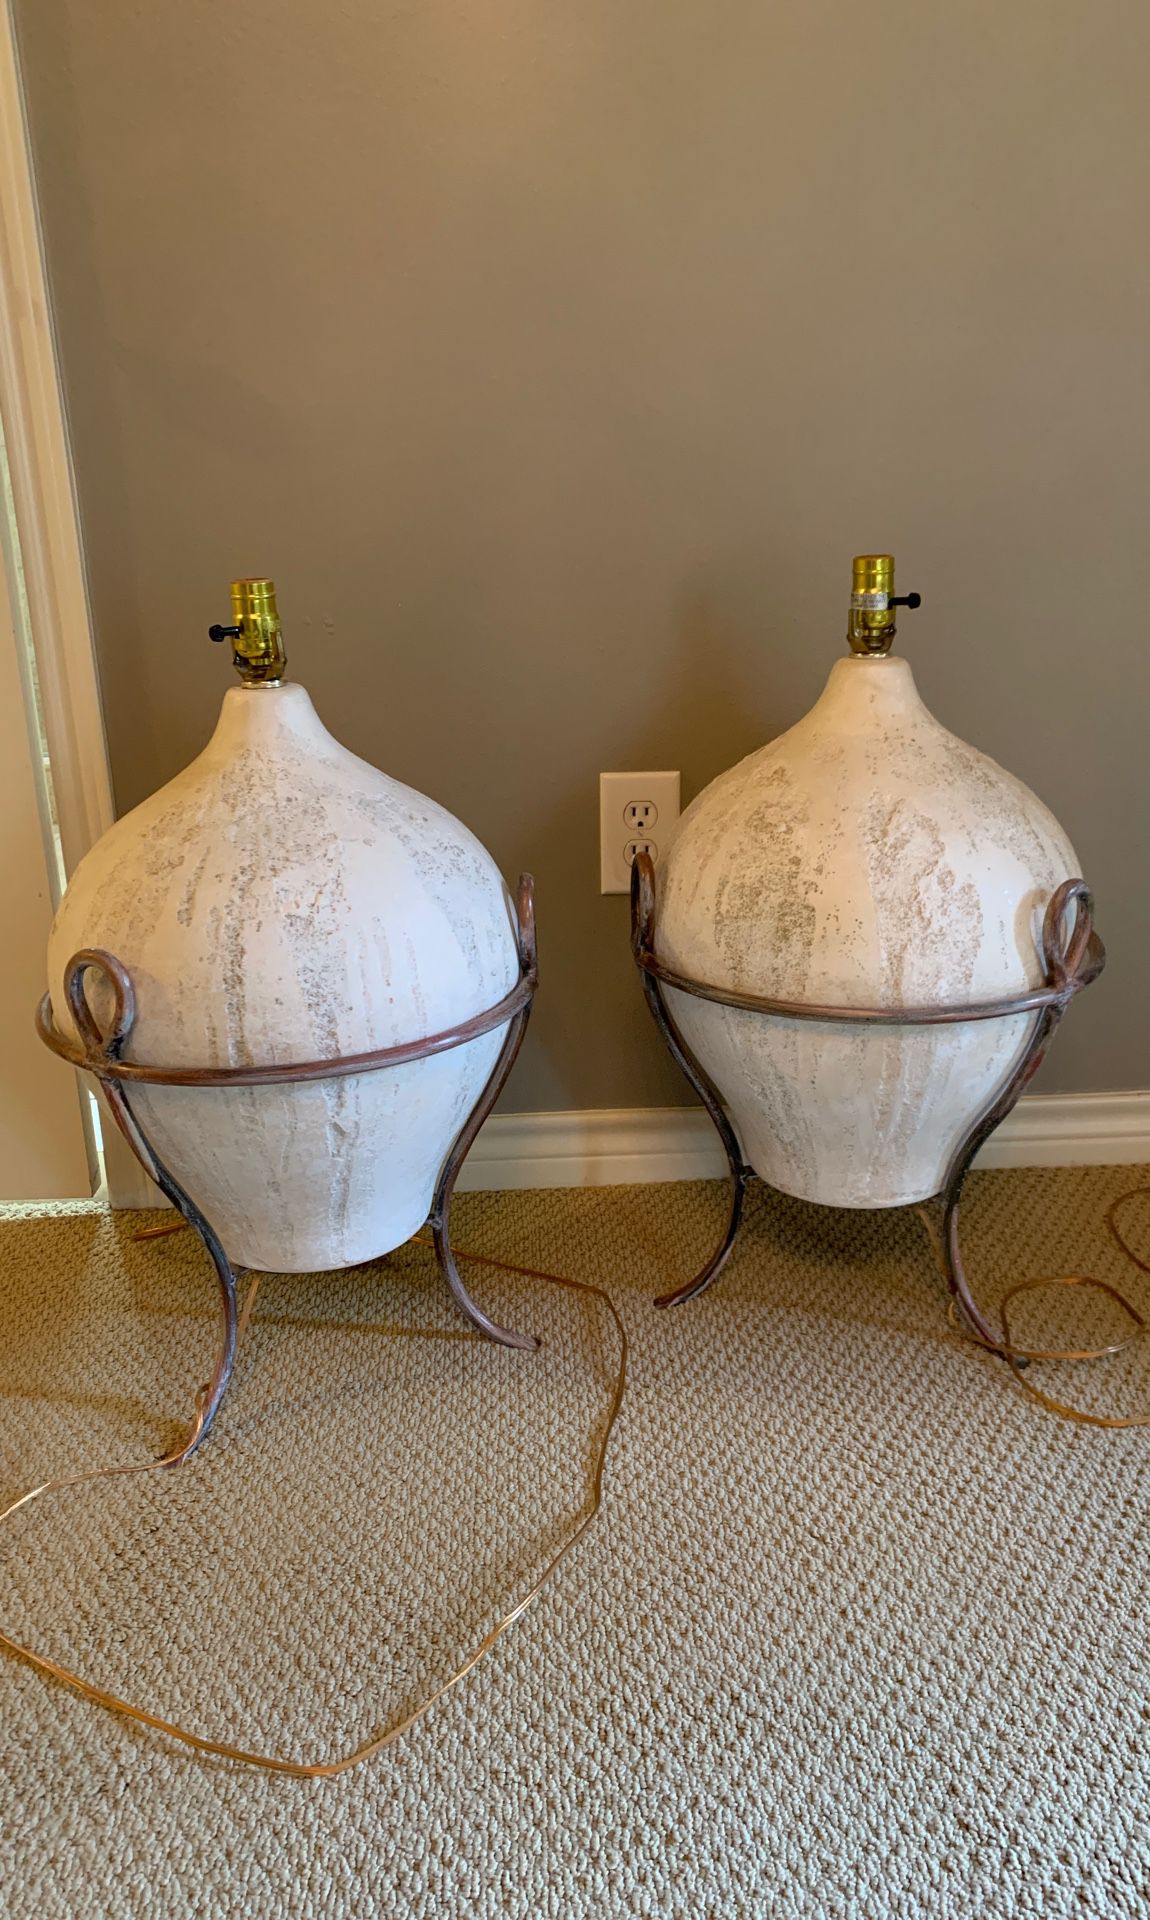 Two stone lamps from local design store